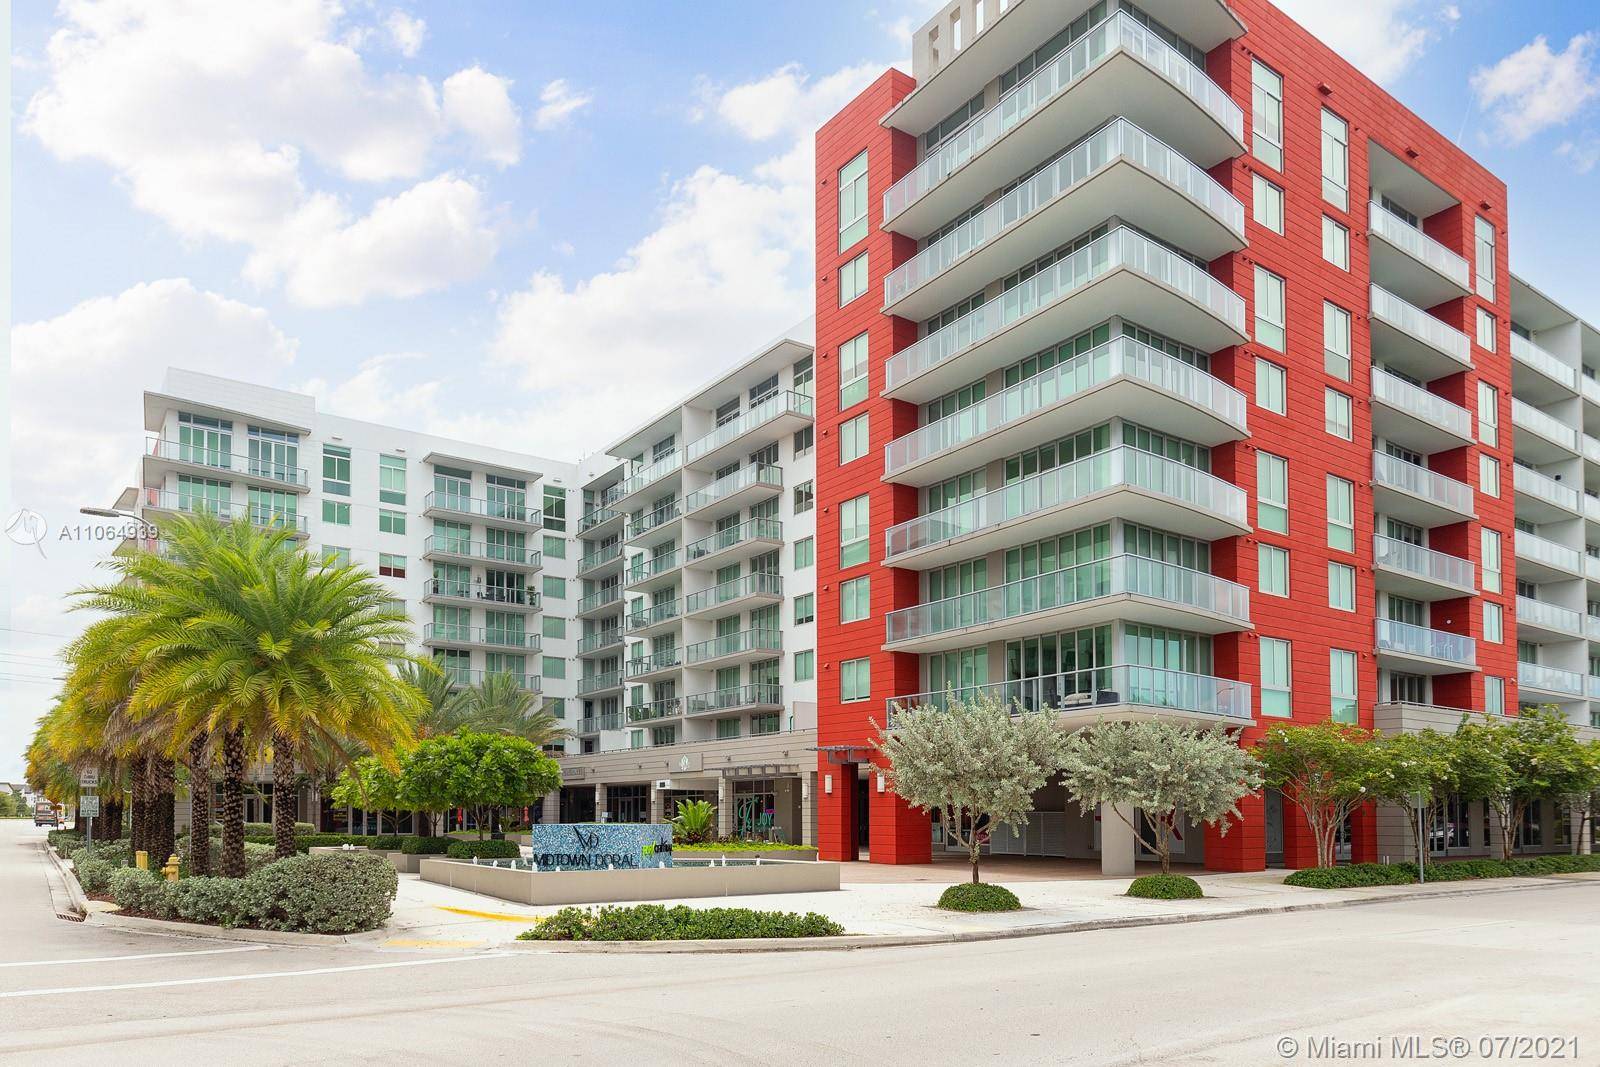 Great opportunity to acquire a 44 unit income producing bulk portfolio plus 62 parking spaces and 40 storages in one of Miami s busiest and most popular areas.